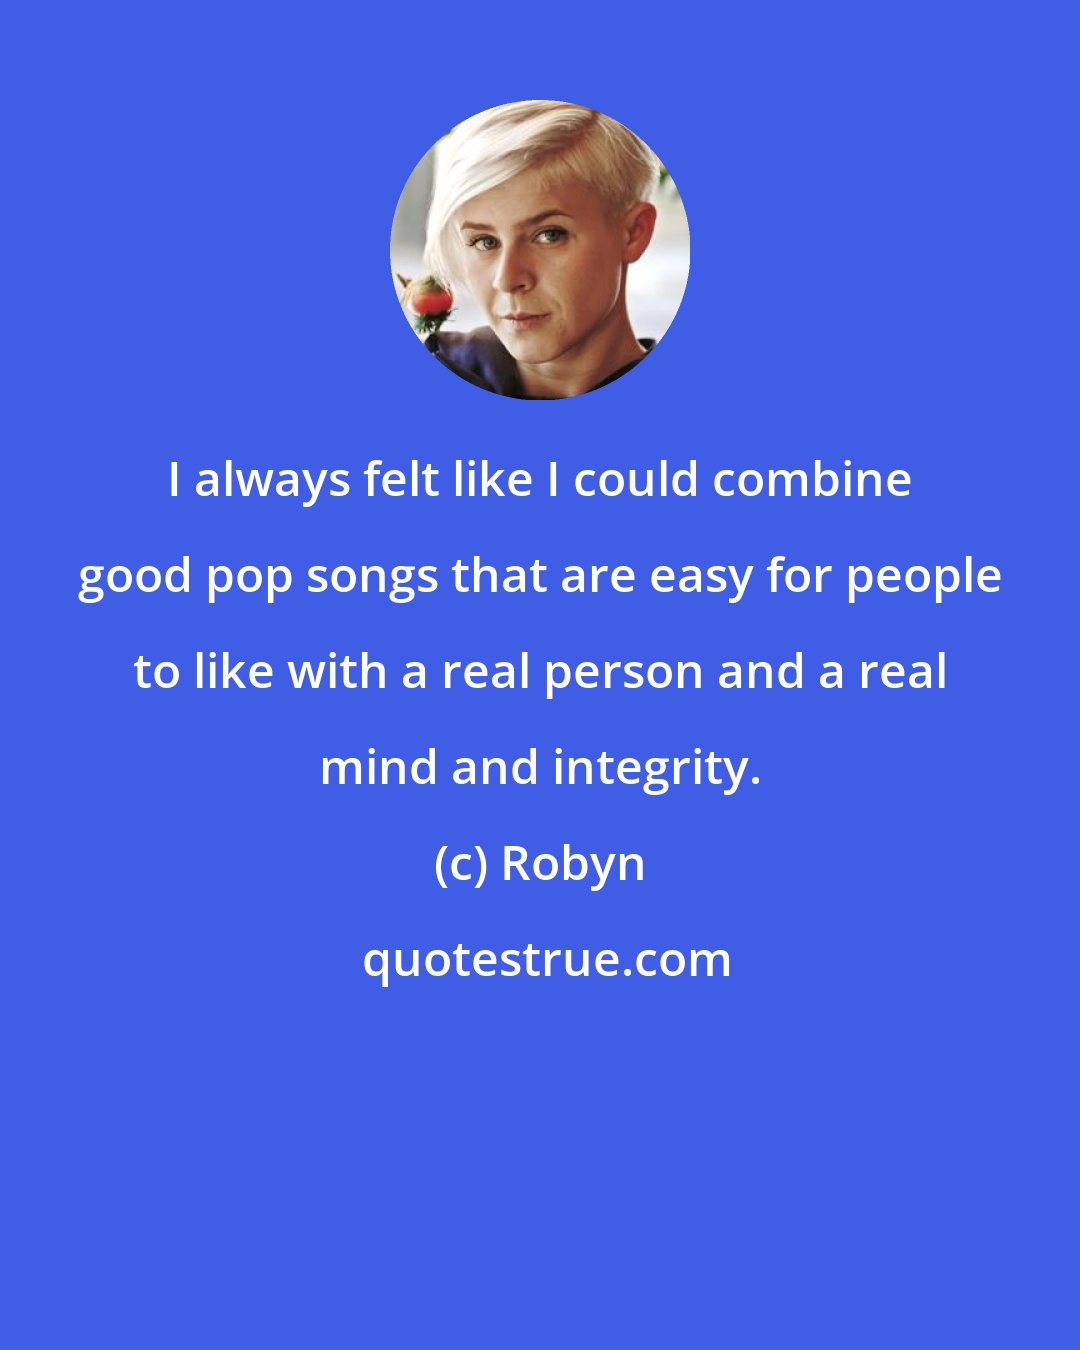 Robyn: I always felt like I could combine good pop songs that are easy for people to like with a real person and a real mind and integrity.